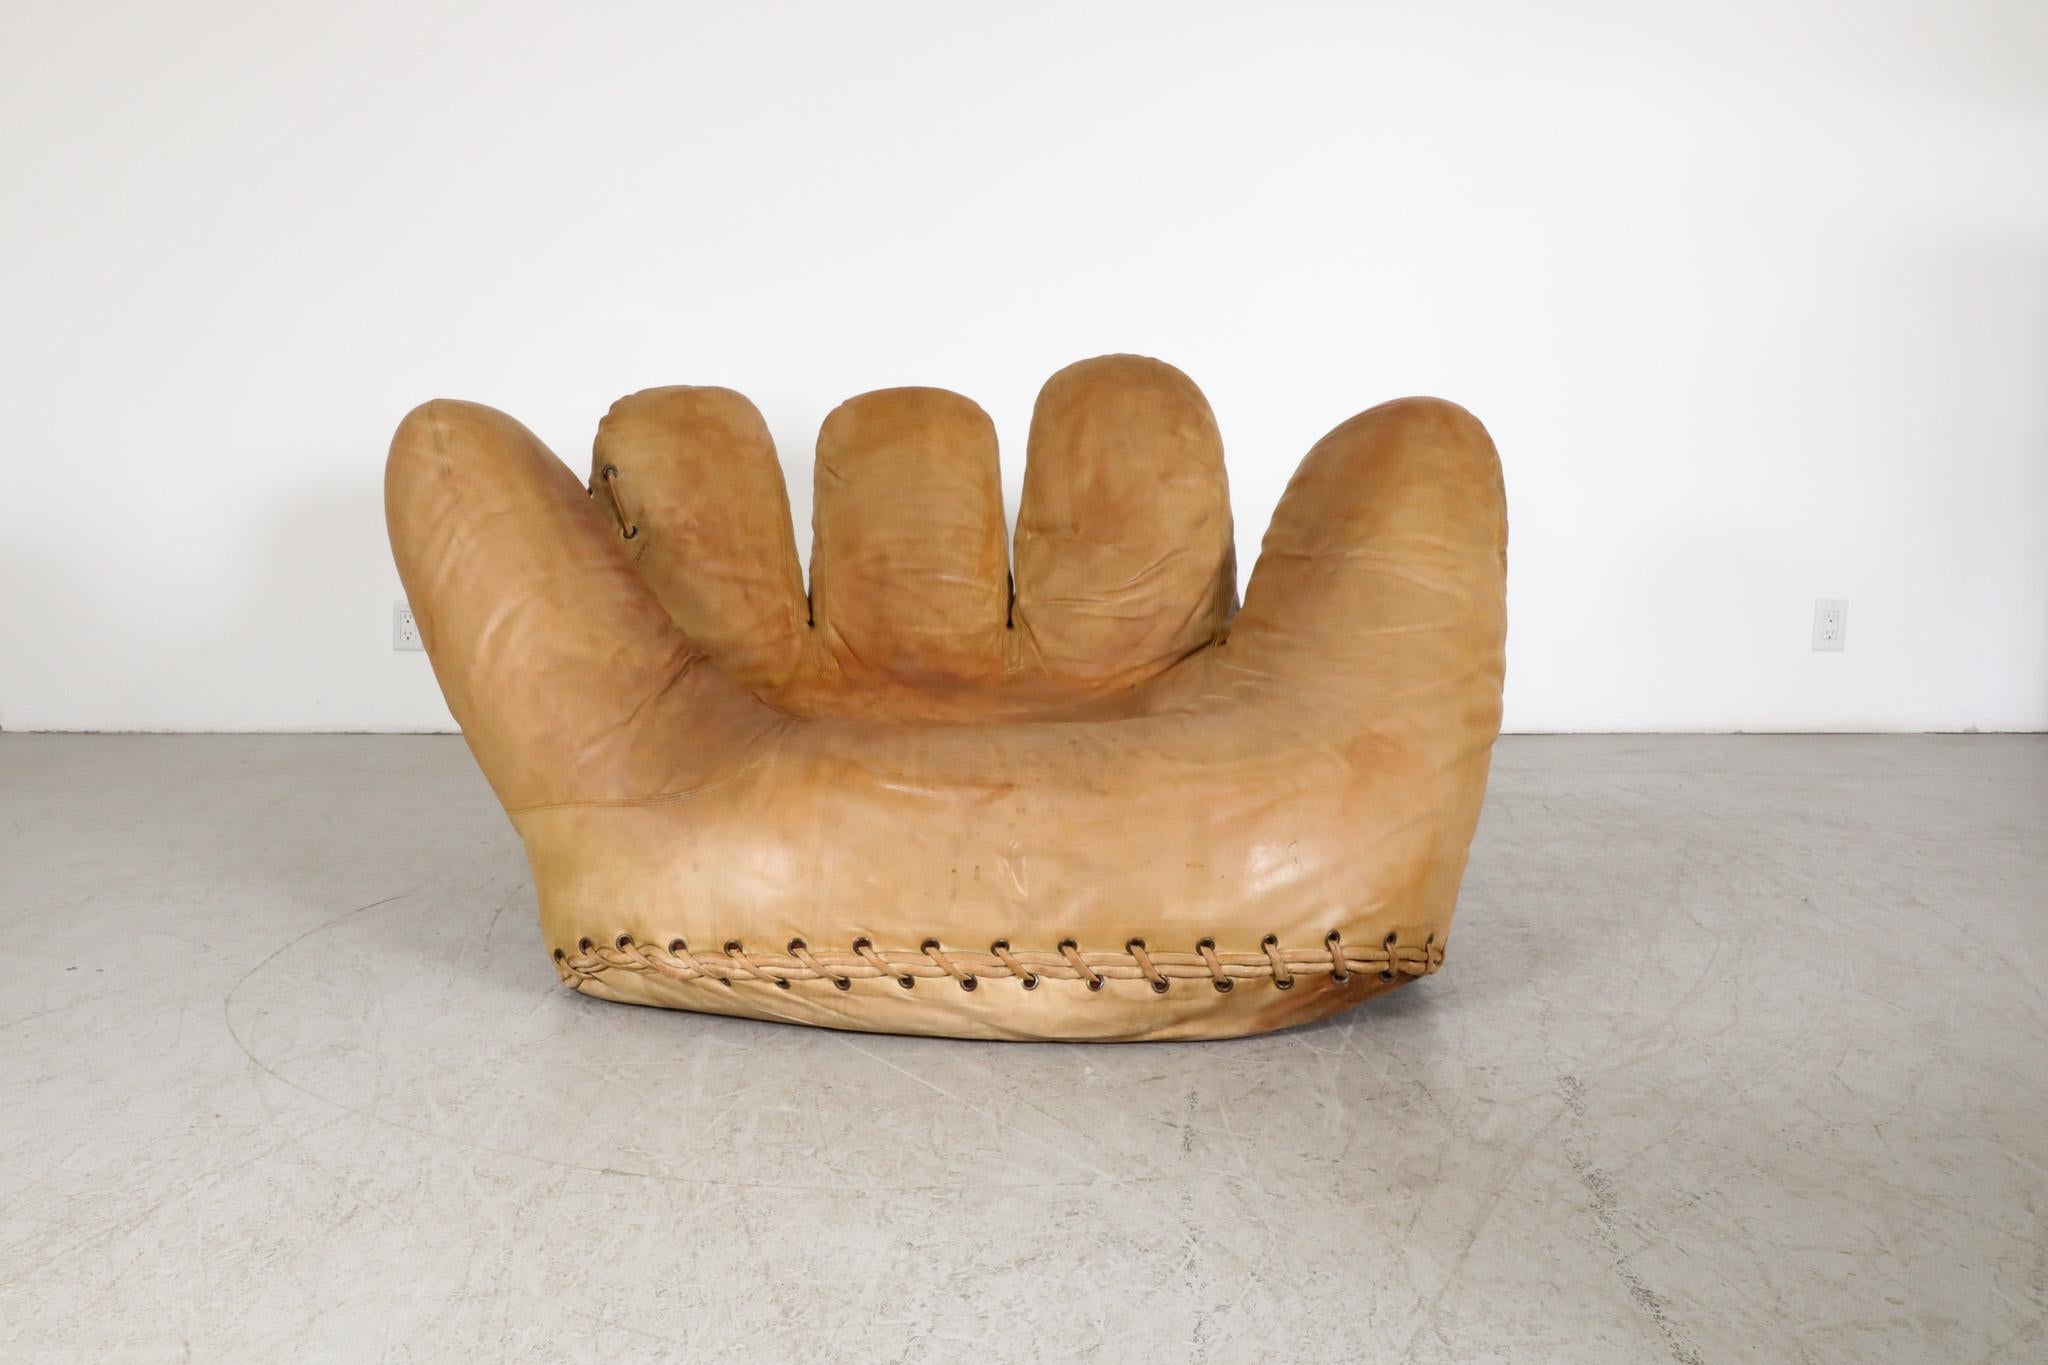 Vintage 'Joe' baseball glove lounge chair for Poltronova, 1970s. Designed as an homage to baseball legend Joe Dimaggio, this classic and now famous lounge chair is made from the highest quality Italian leather and has Joltin' Joe